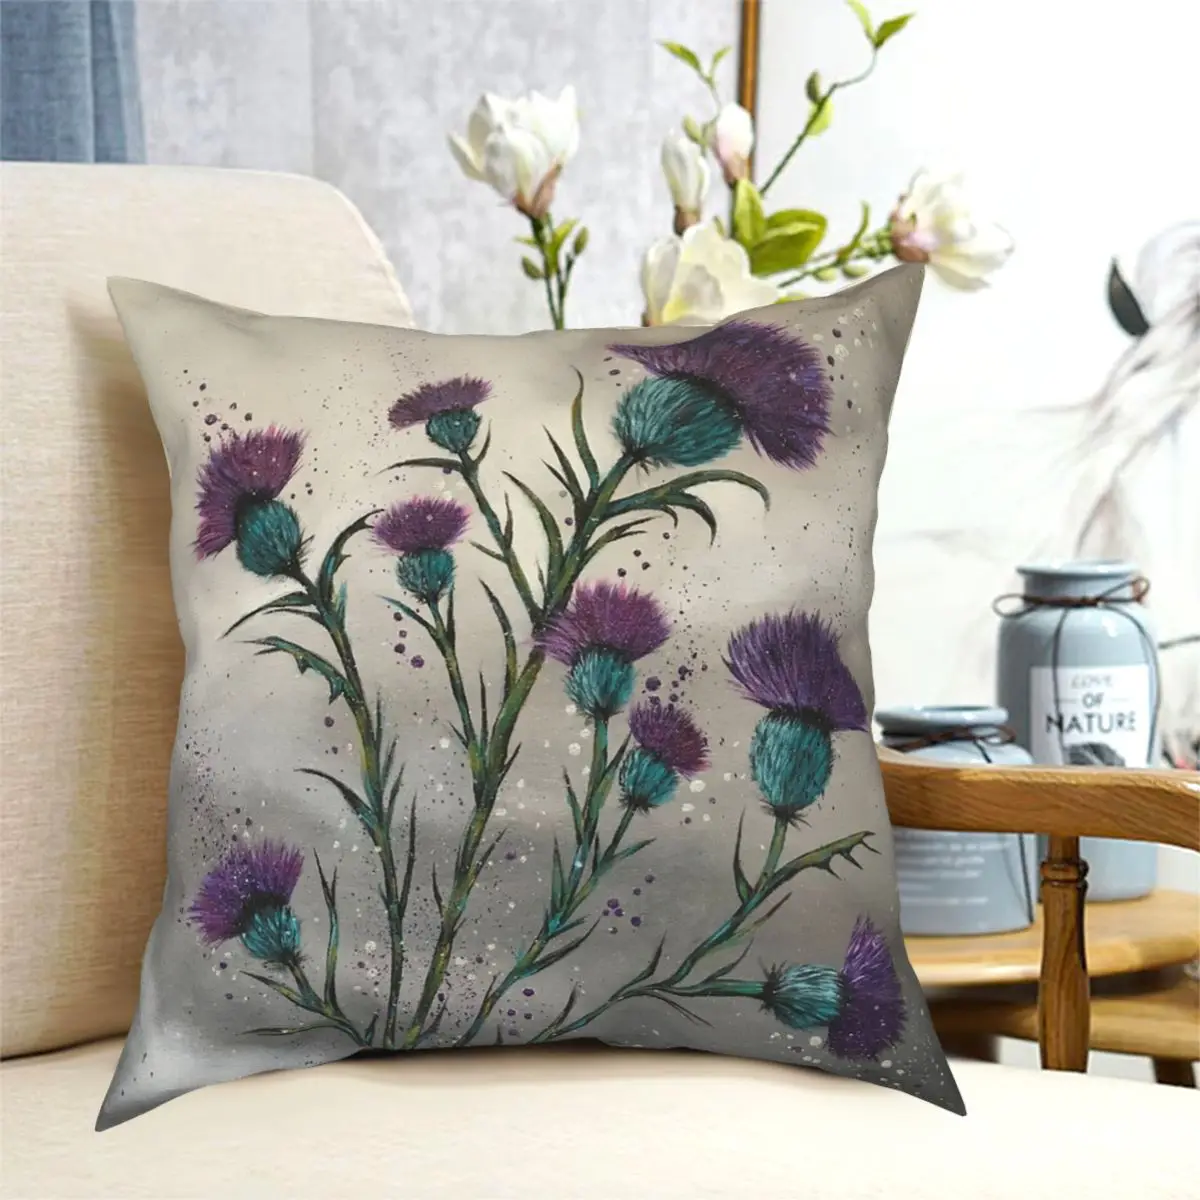 

Scottish Traditional Purple Thistle Pillowcase Polyester Printed Zip Decorative Throw Pillow Case for Sofa Cushion Cover